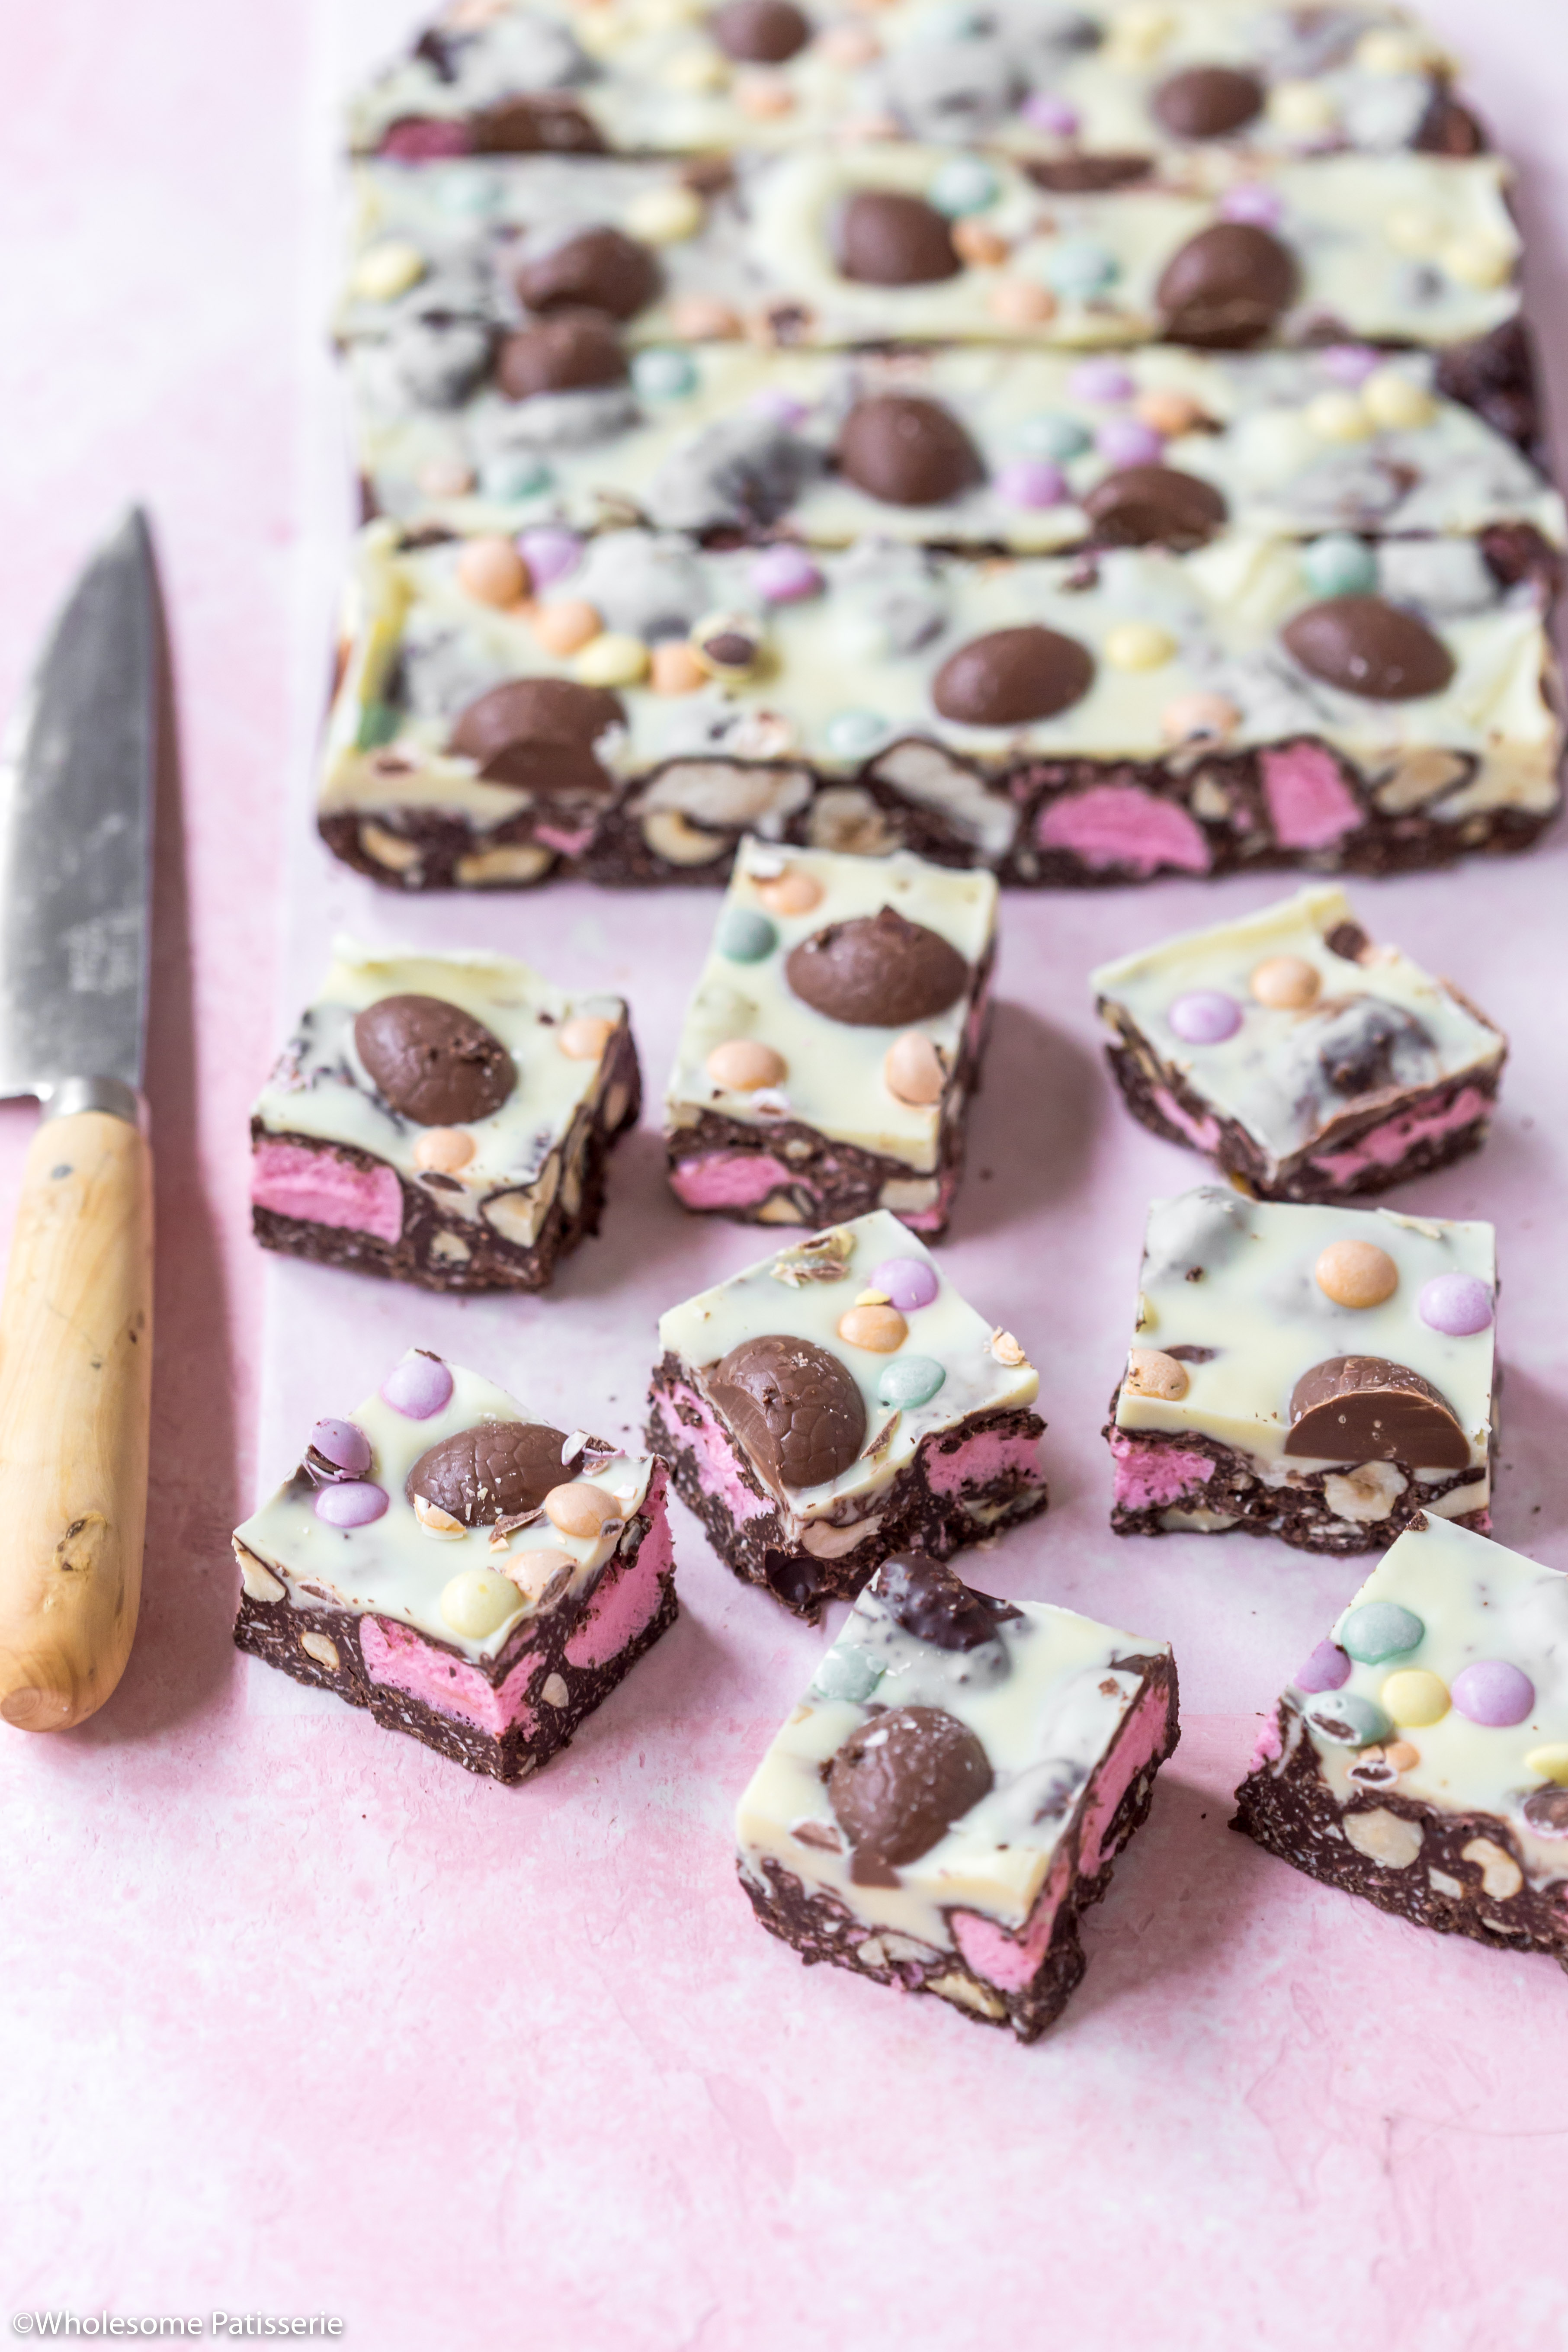 Easter rocky road sliced into squares and displayed on pink backdrop next to decorative knife.